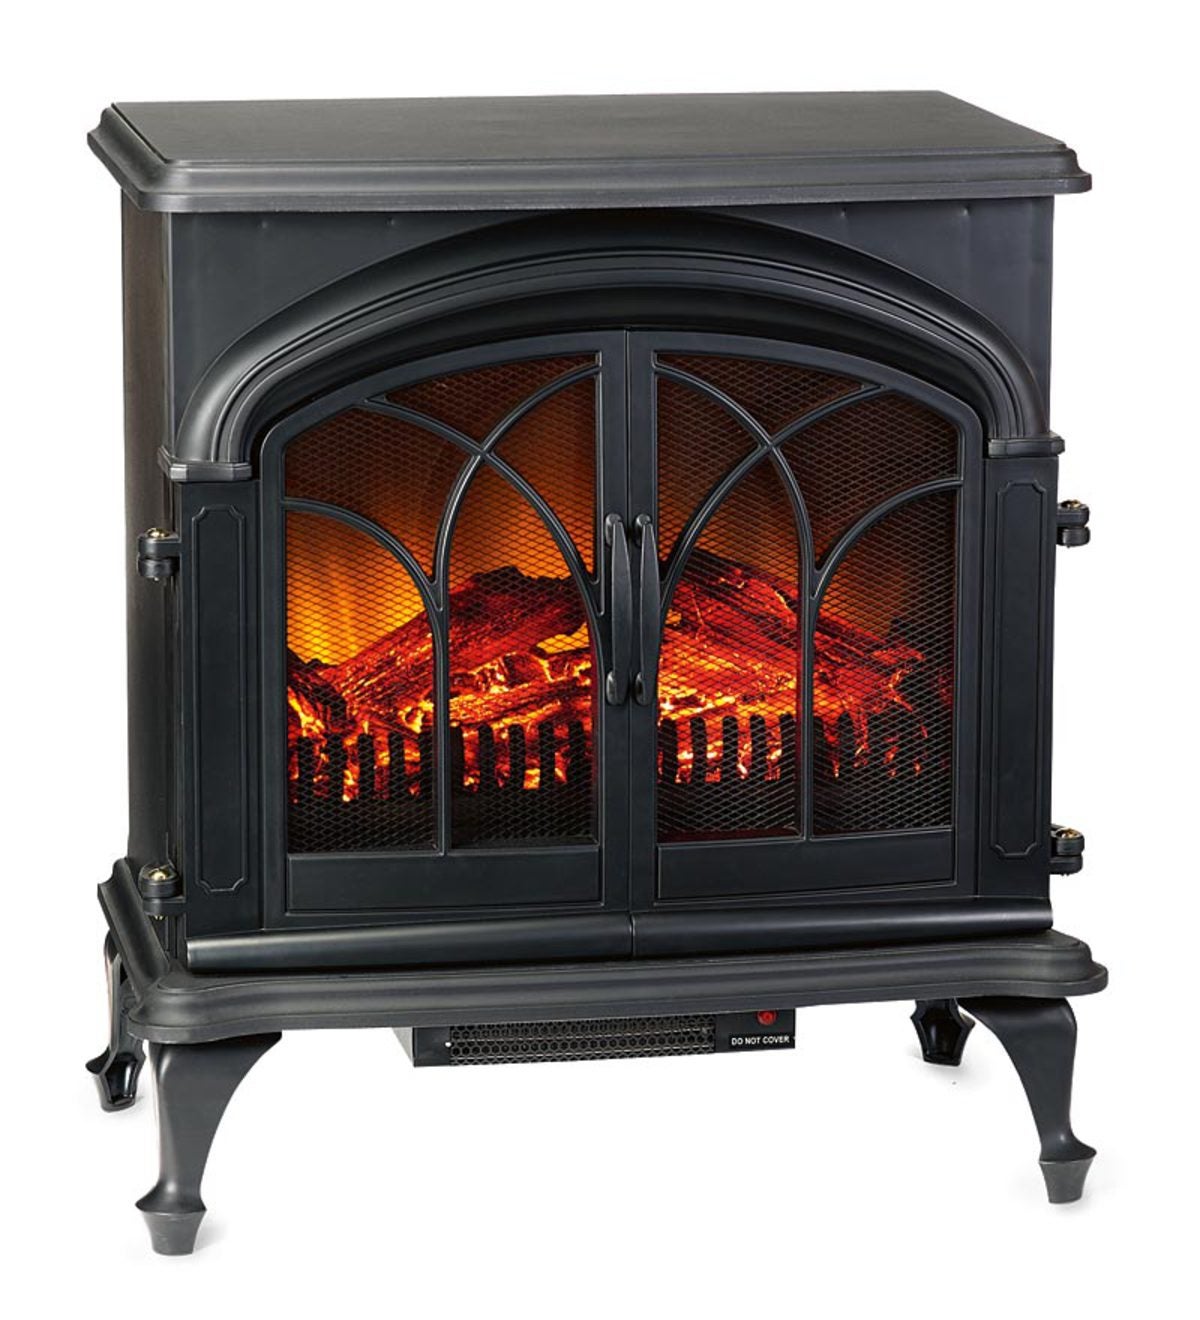 Black NETTA Electric Fireplace Stove Heater 2000W with Fire Flame Effect Freestanding Portable Electric Log Wood Burner Effect Arch Design